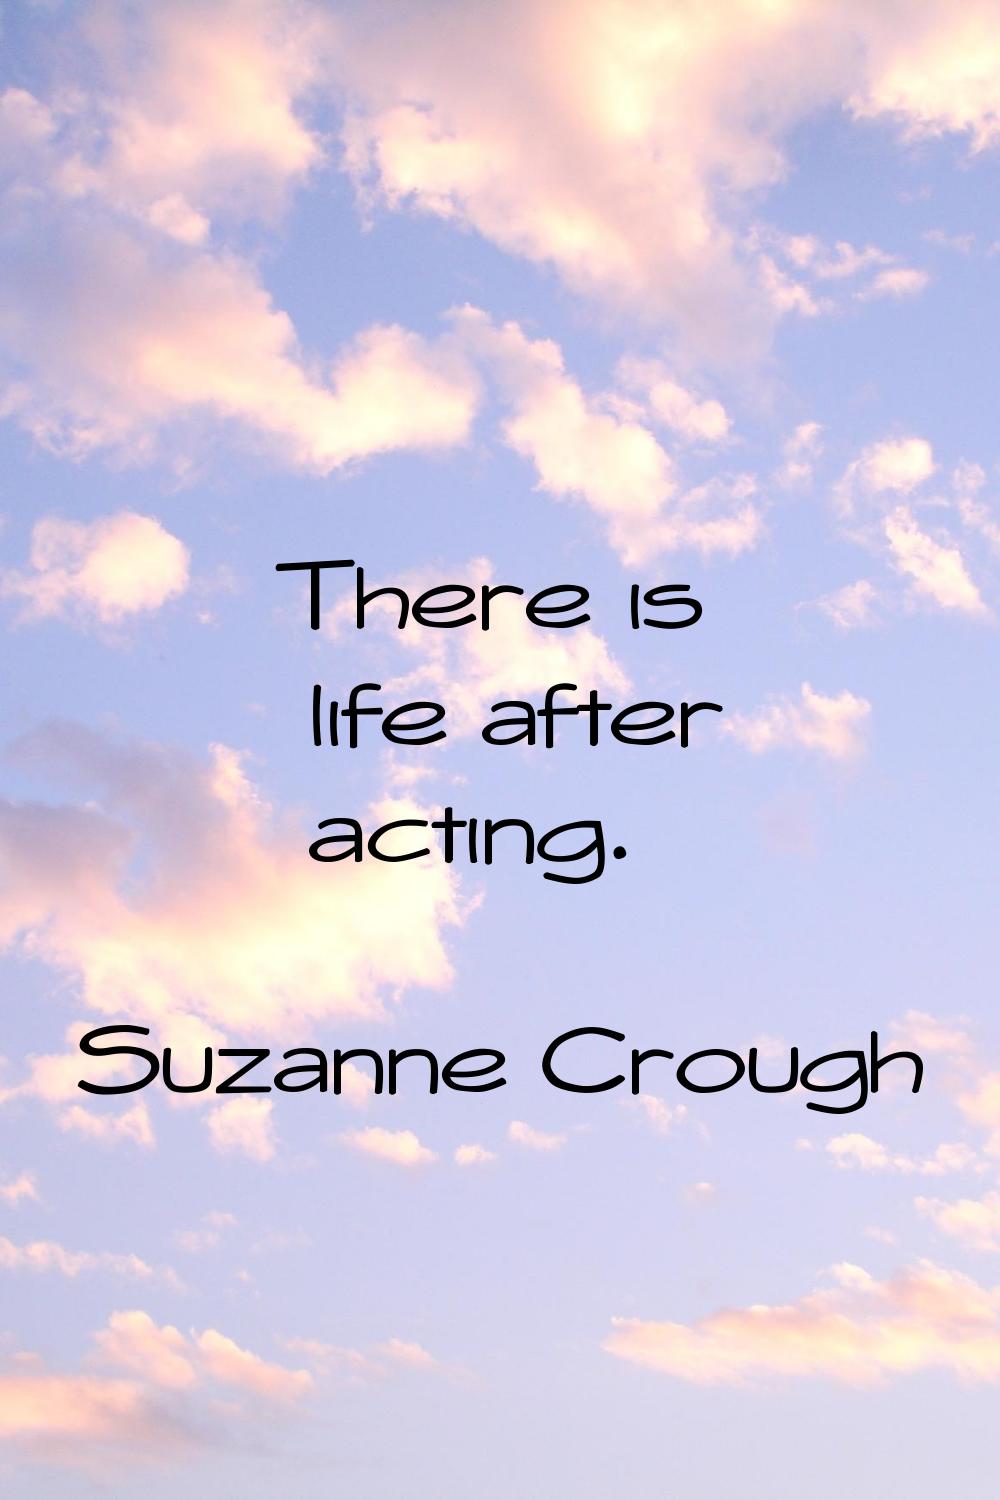 There is life after acting.